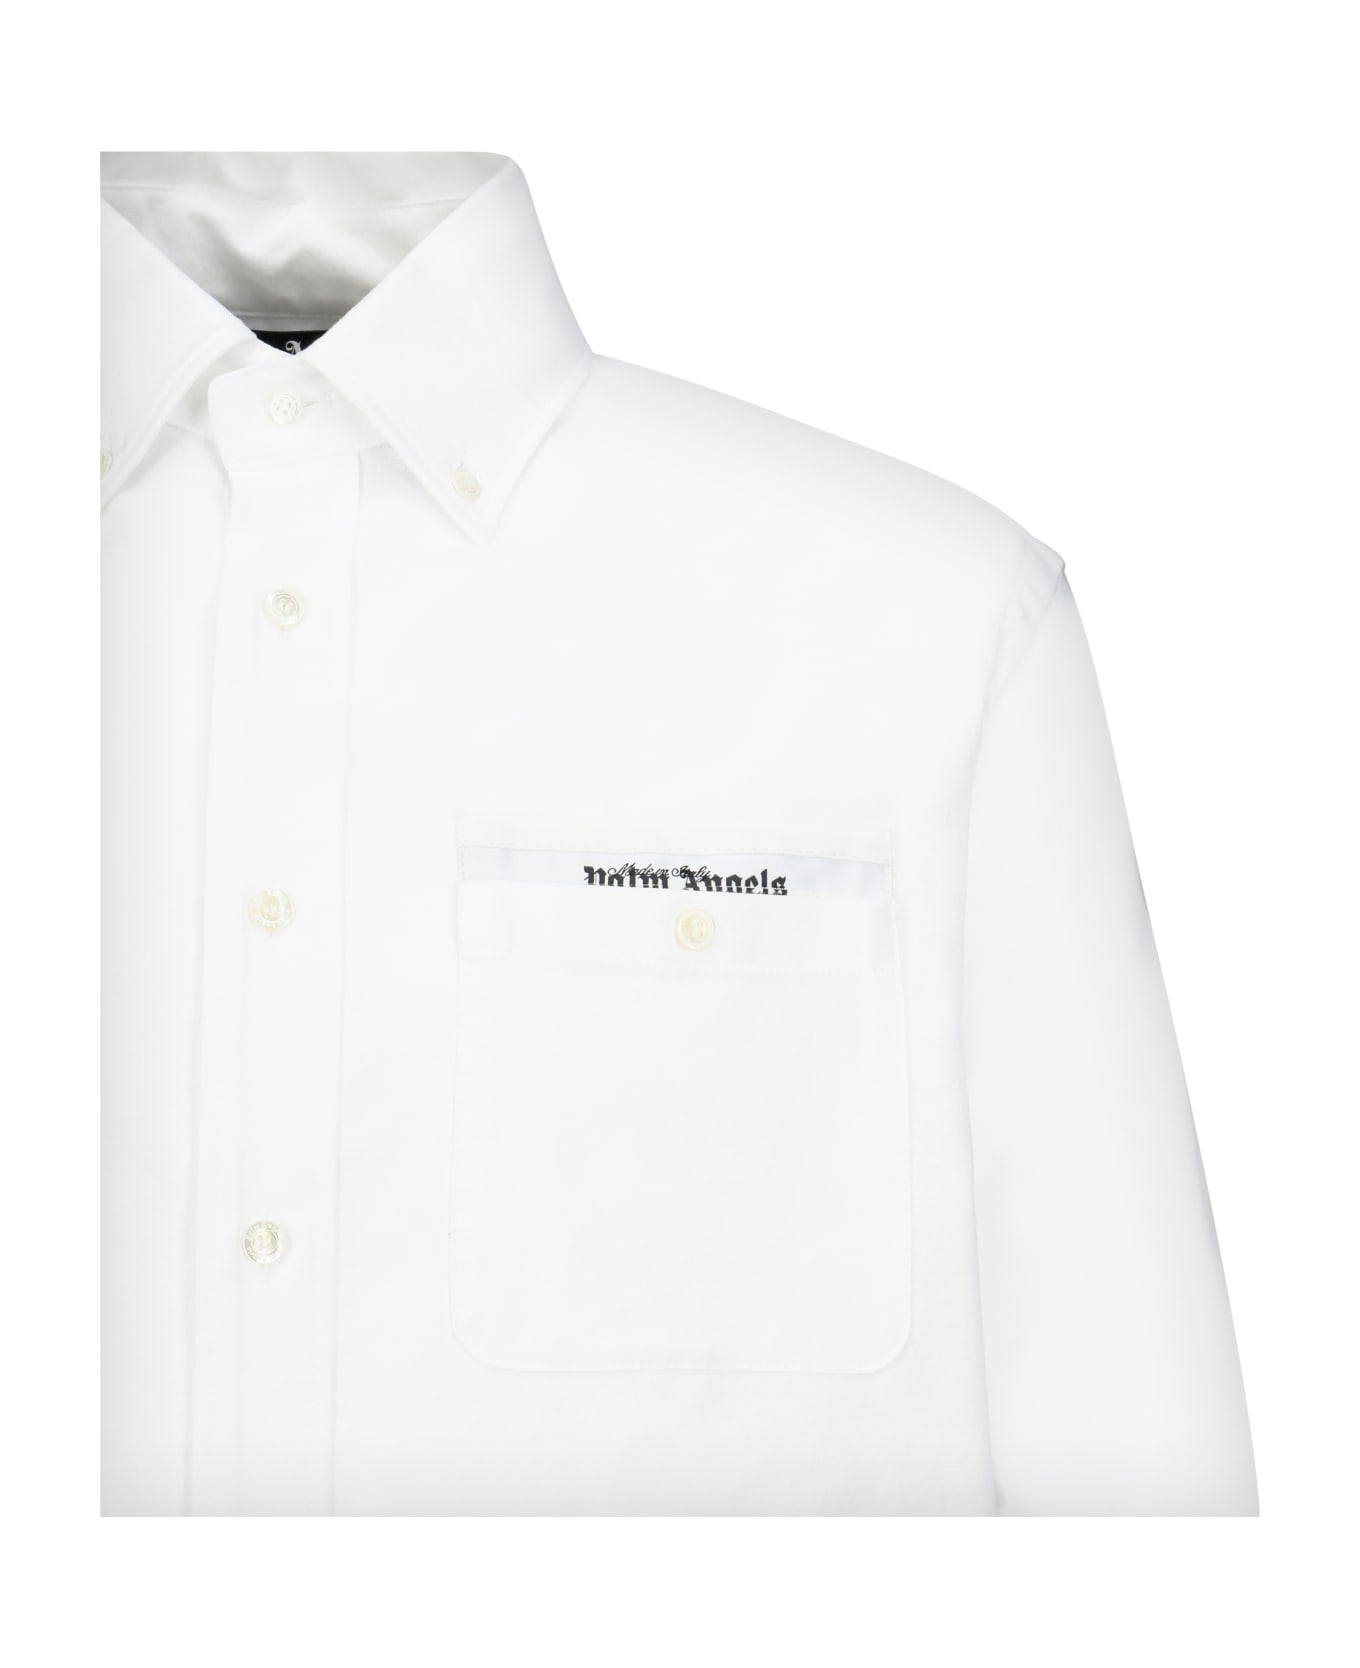 Palm Angels White Shirt With Pocket - White シャツ